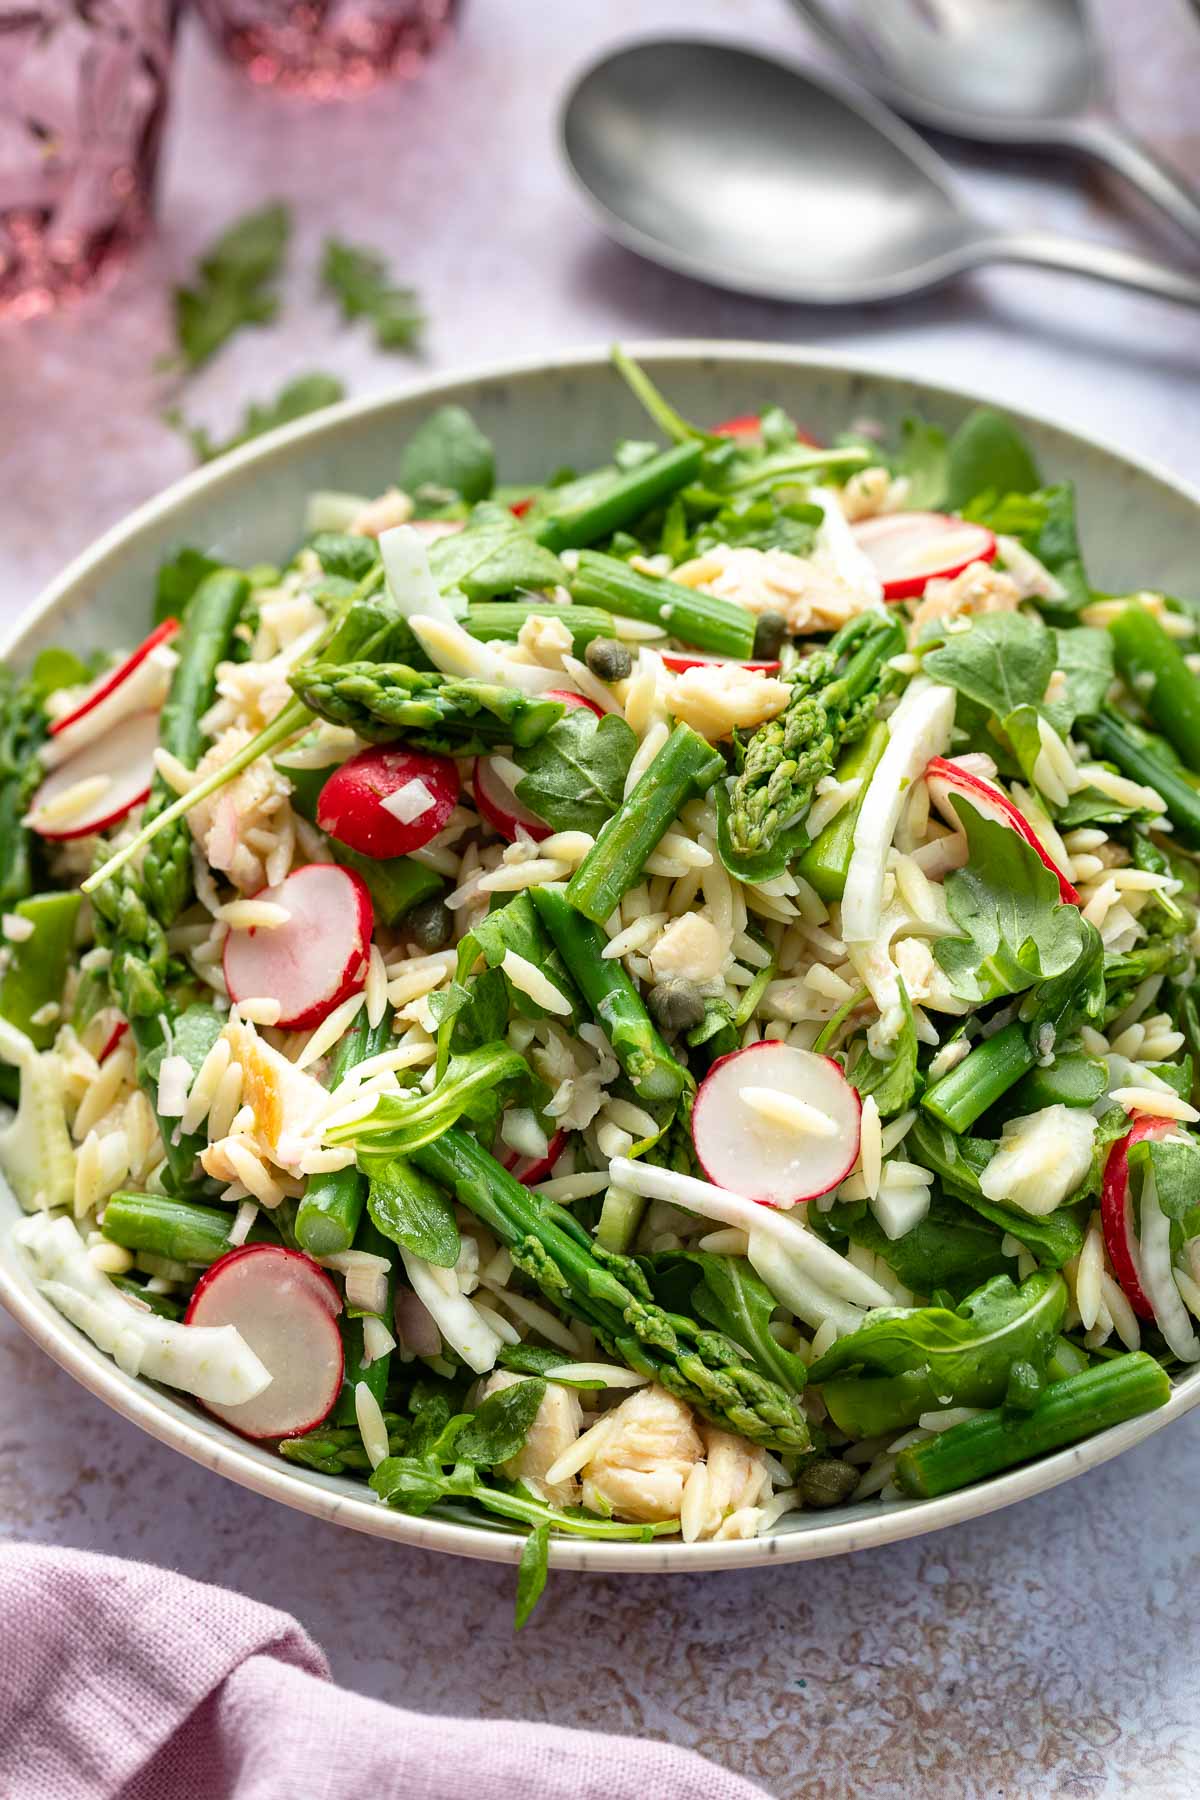 Smoked Trout Pasta Salad with Asparagus & Fennel